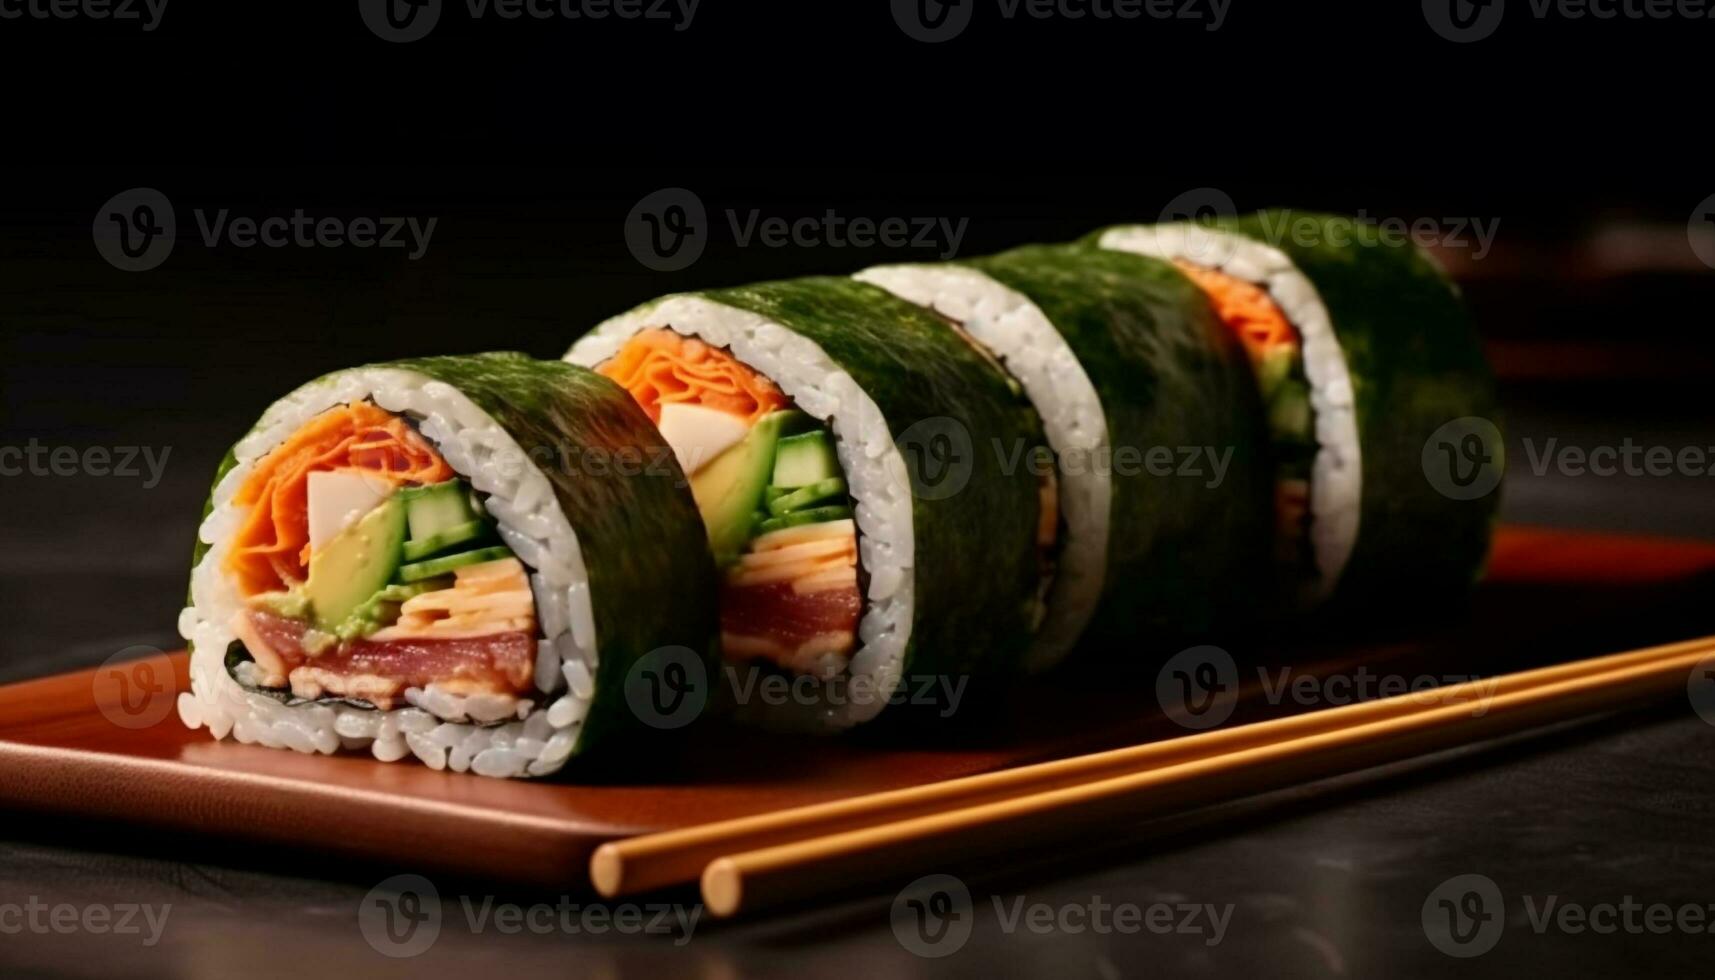 Freshness rolled up on a plate, gourmet seafood meal with avocado and rice generated by AI photo